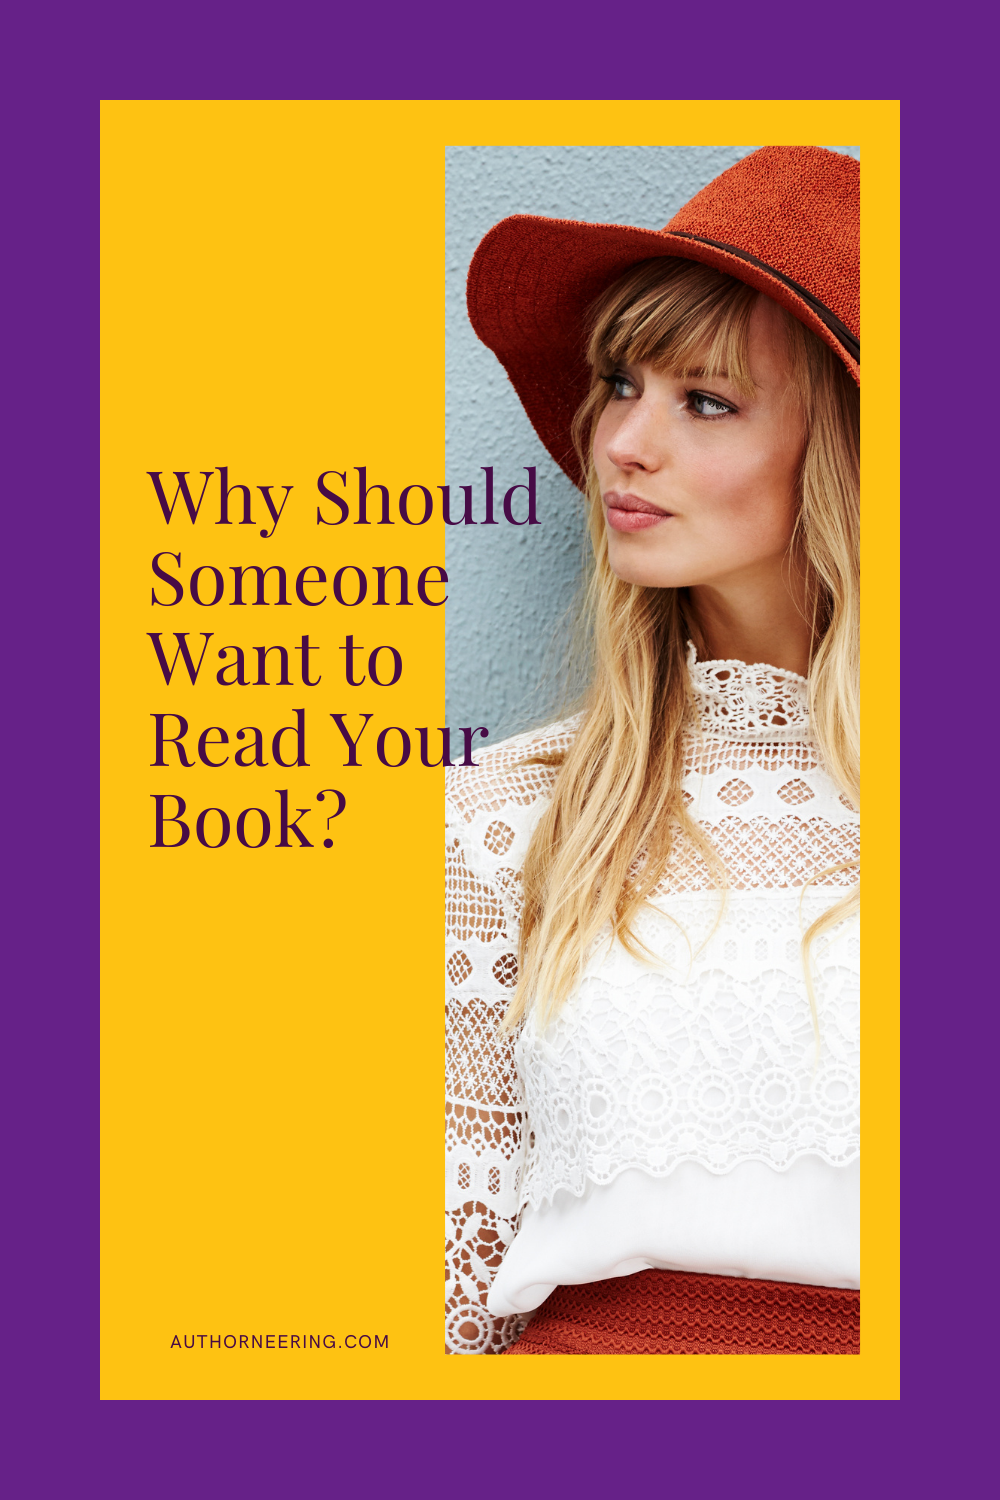 Why Should Someone Want to Read your Book